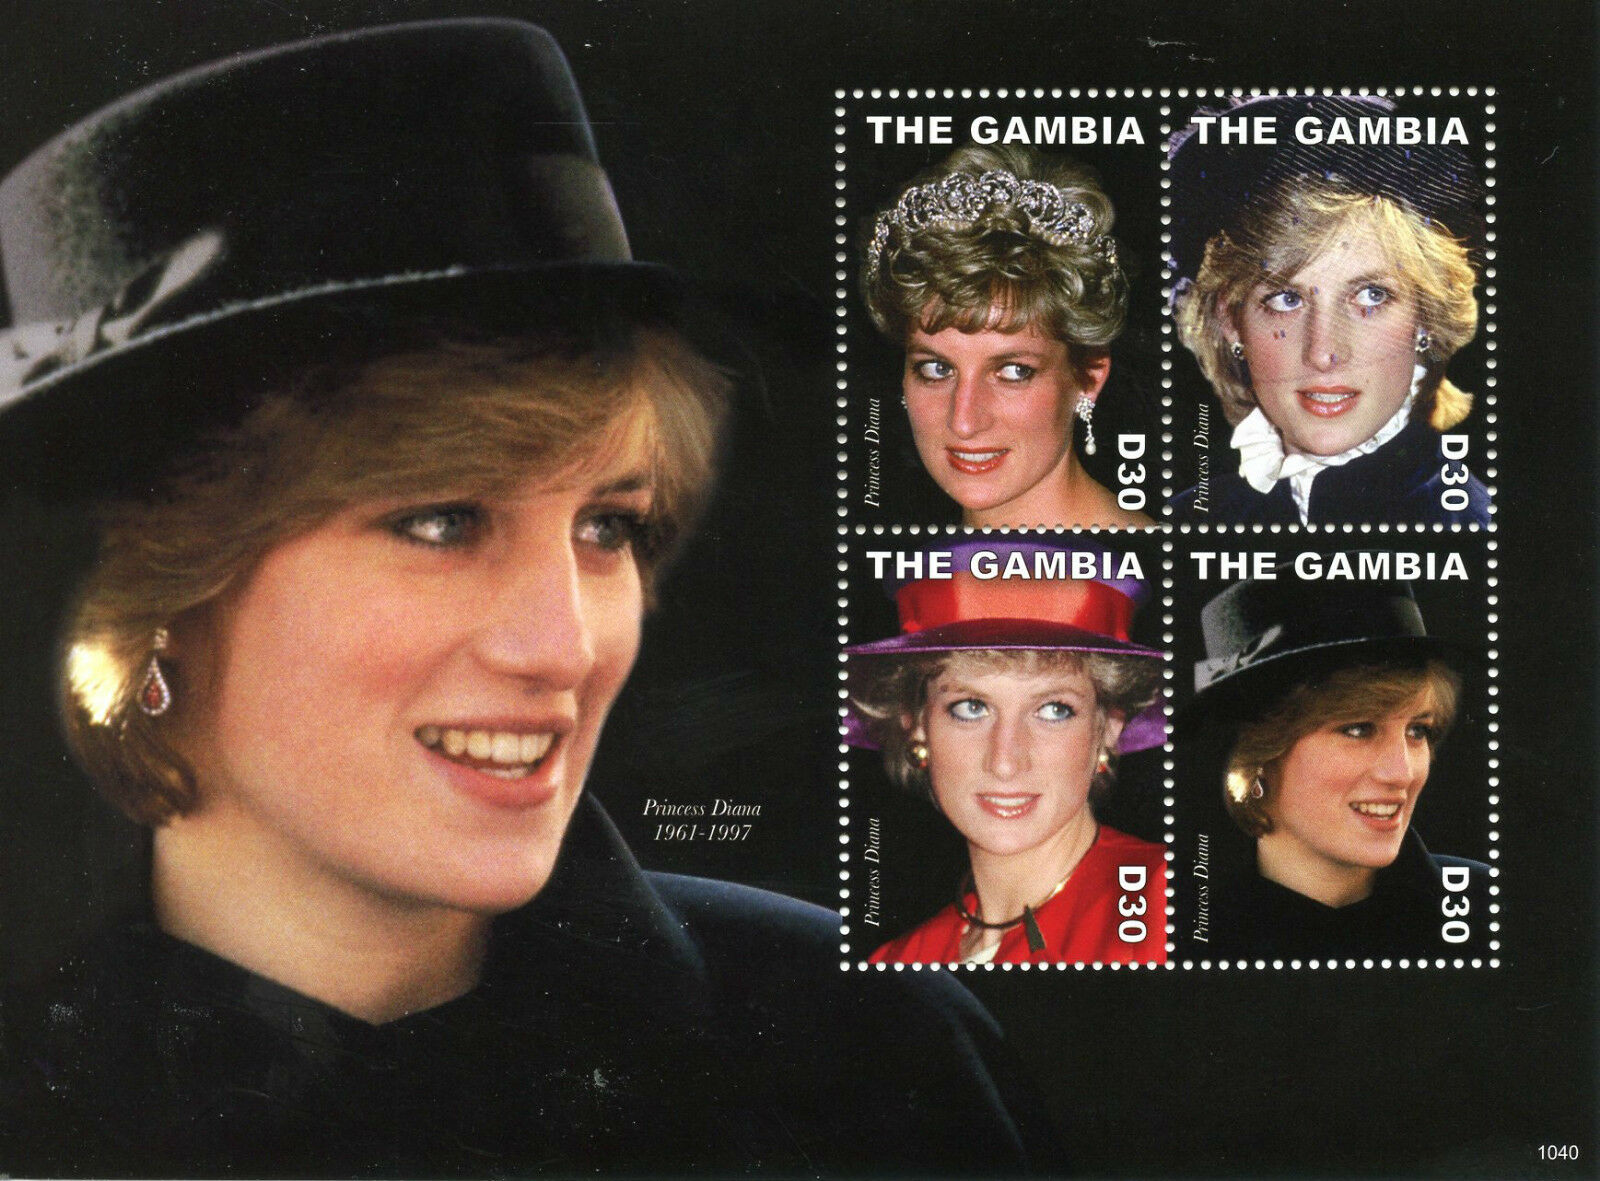 Gambia 2010 MNH Royalty Stamps Princess Diana 1961-1997 Famous People 4v M/S II